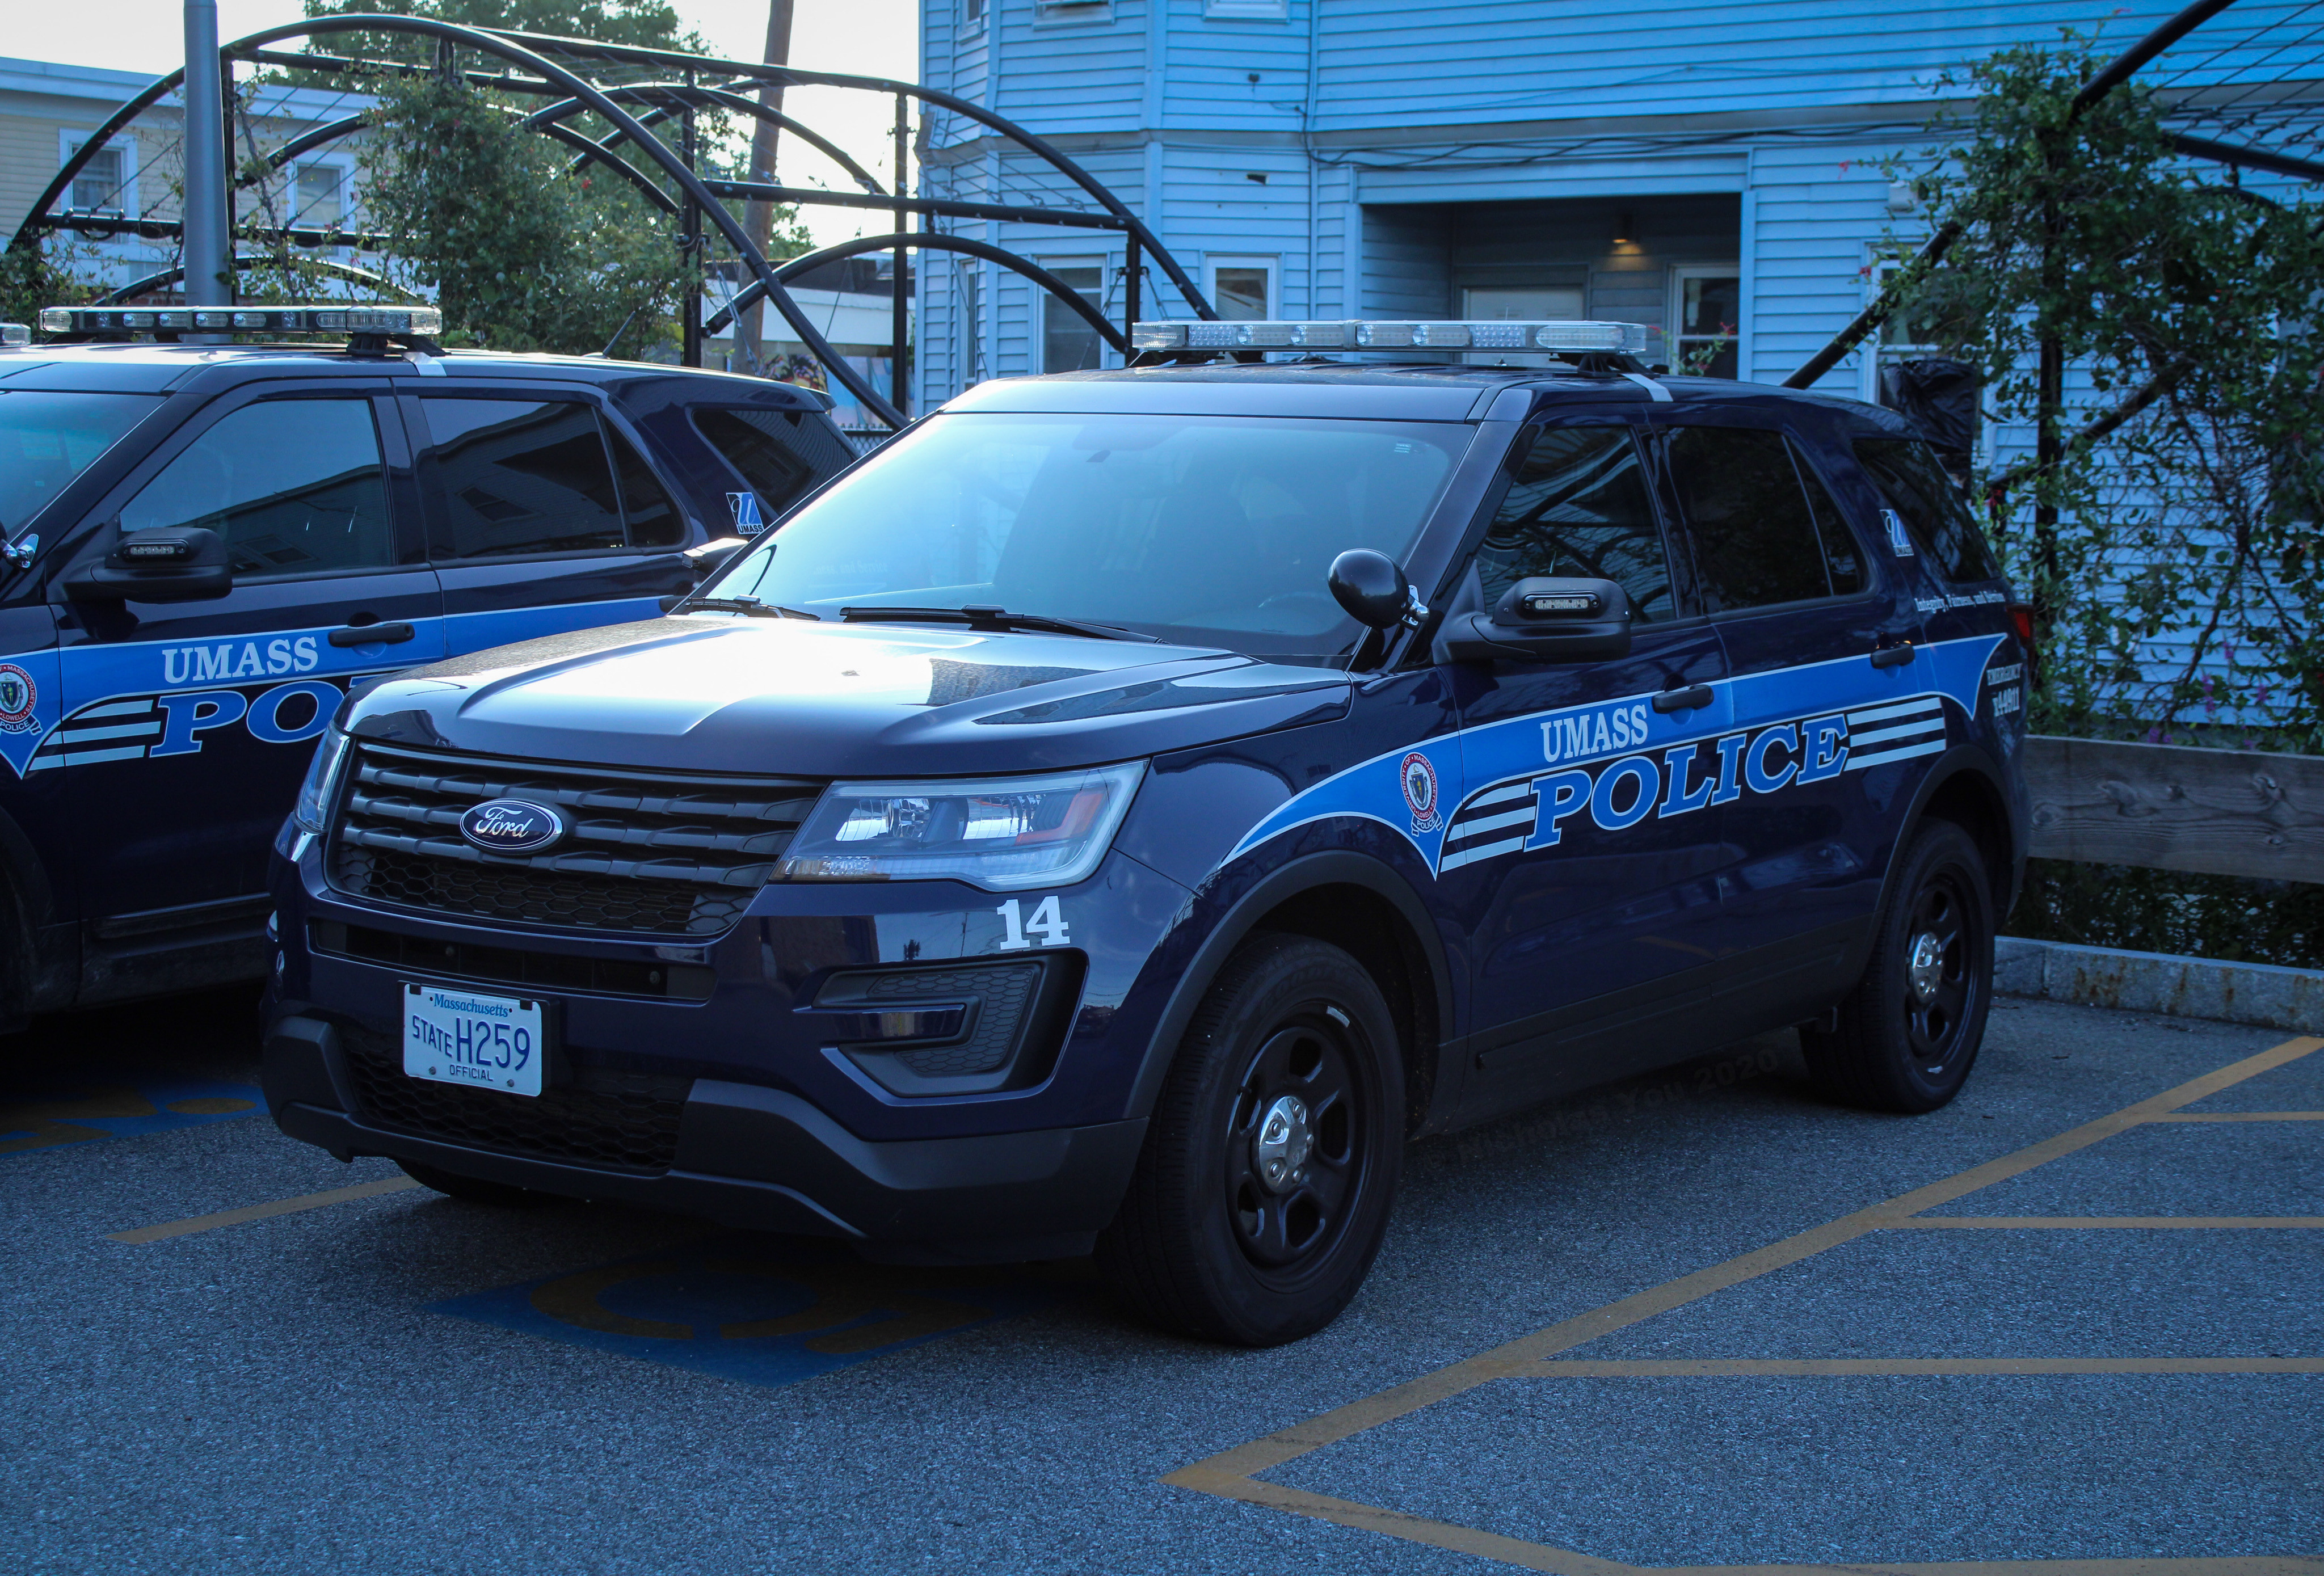 A photo  of University of Massachusetts Lowell Police
            Cruiser 14, a 2016-2019 Ford Police Interceptor Utility             taken by Nicholas You